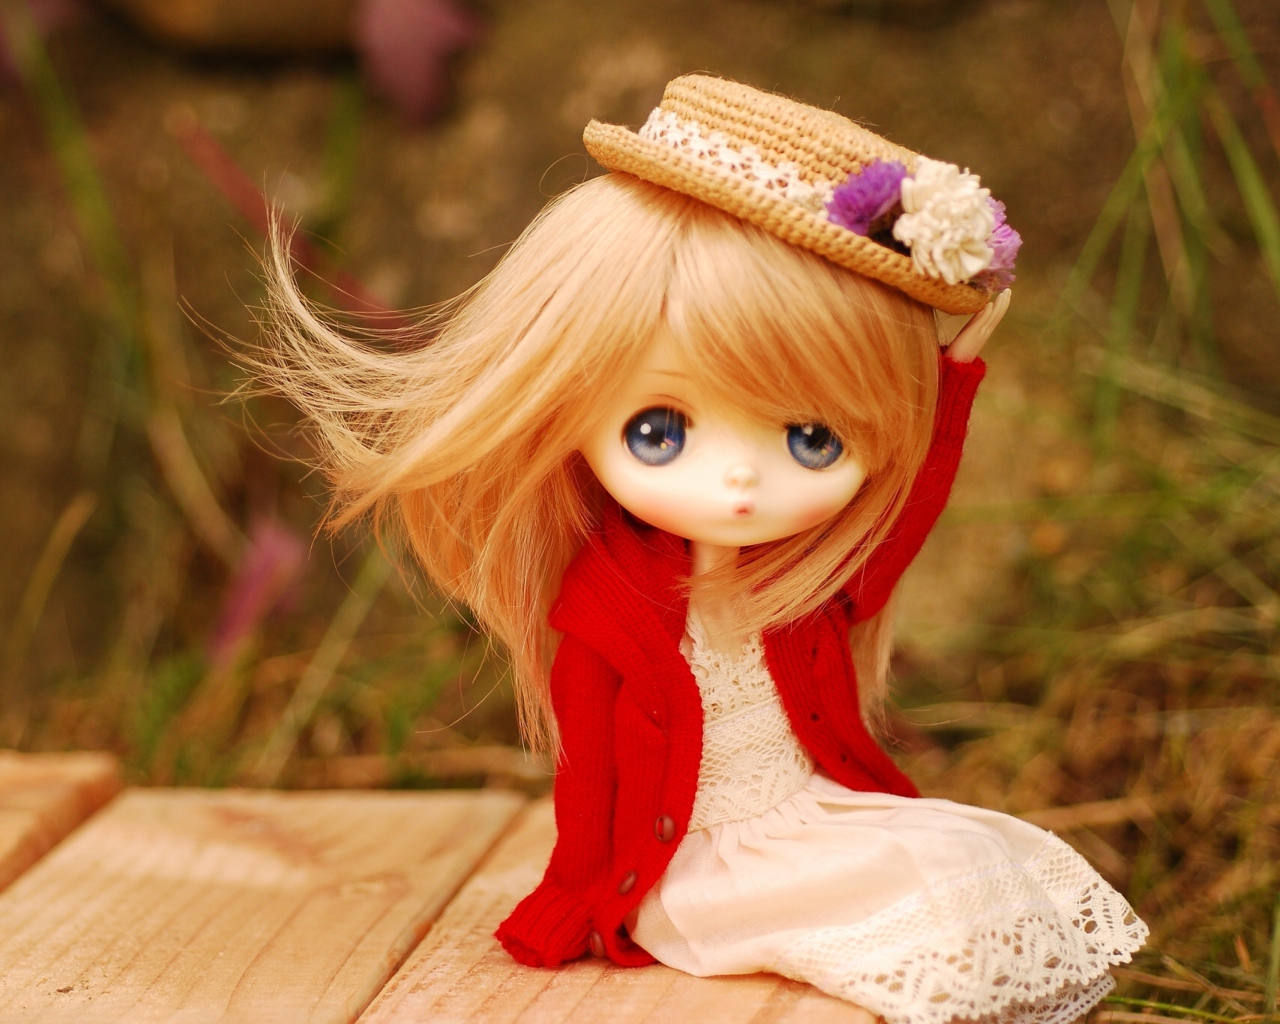 Blonde Doll In Romantic Dress And Hat wallpaper 1280x1024